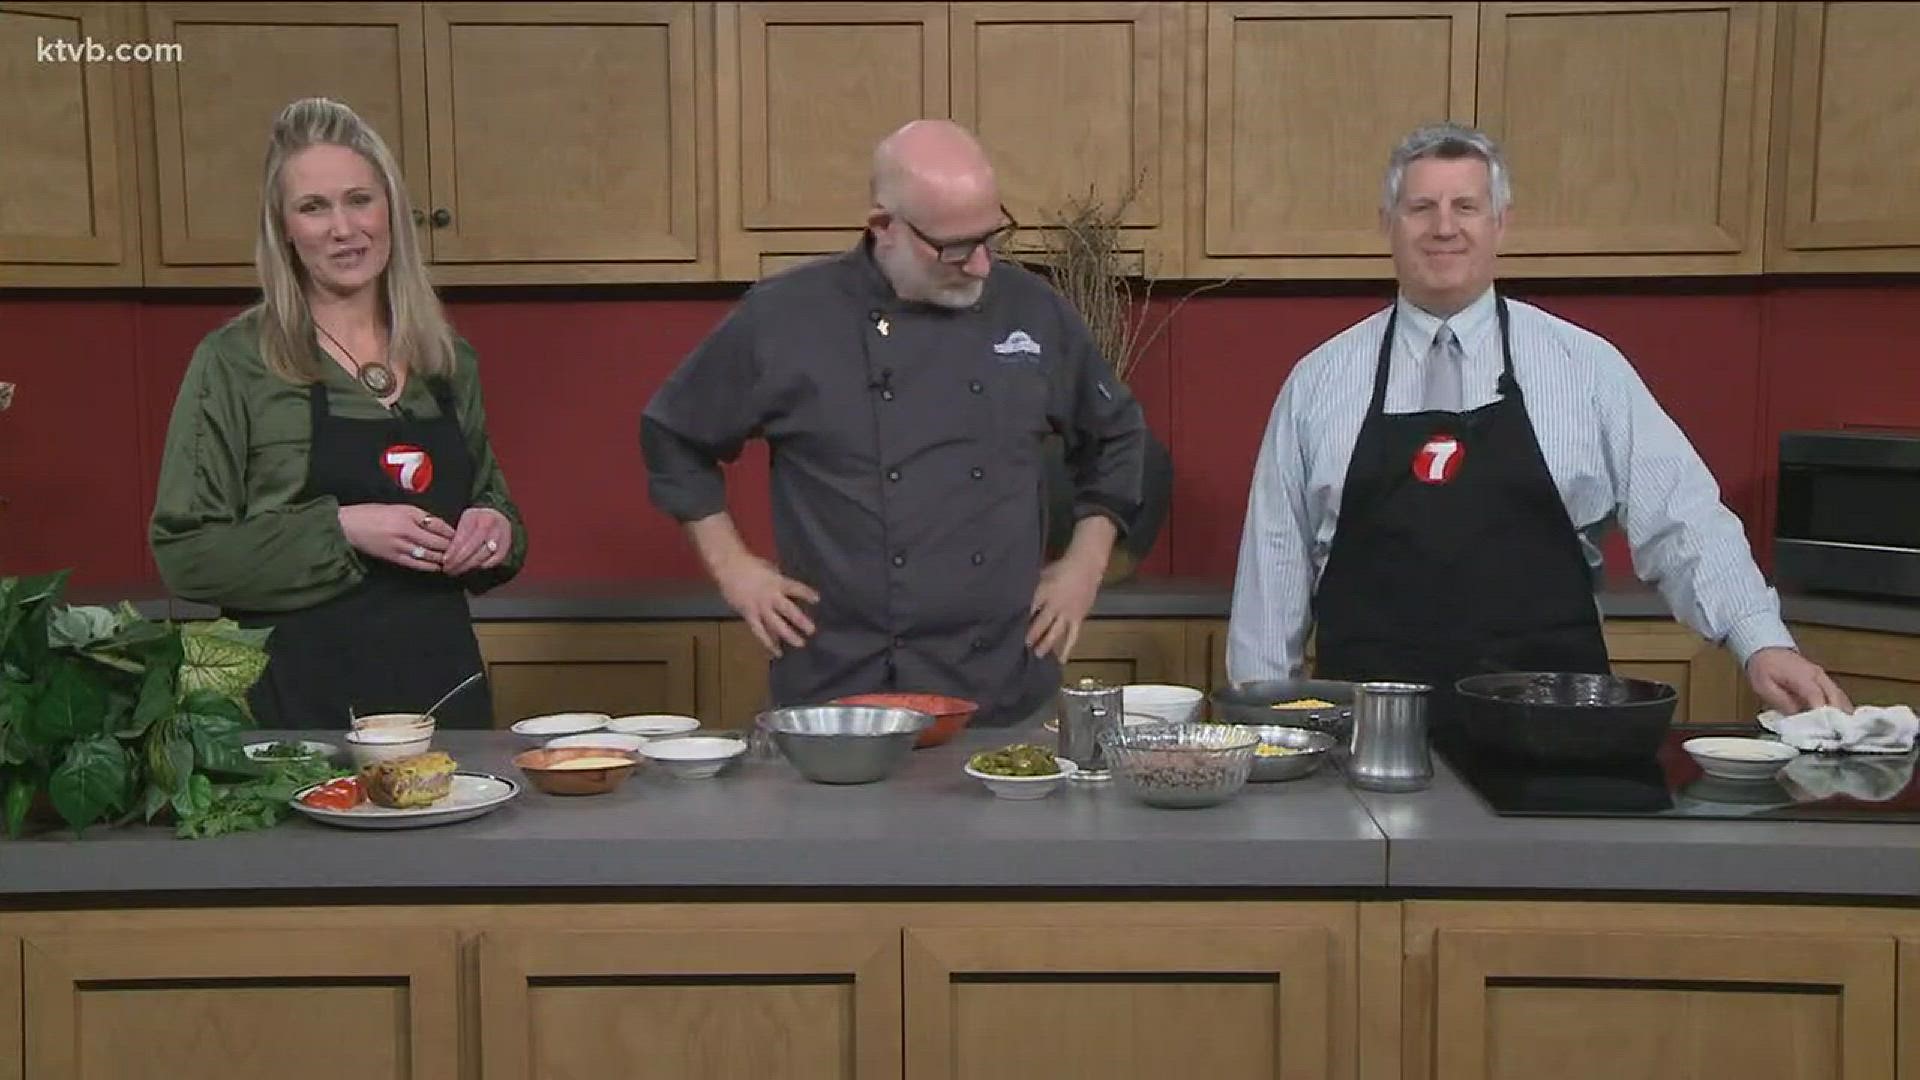 Chef Lou joins the Saturday Morning News to share his beefy jalapeno cornbread recipe